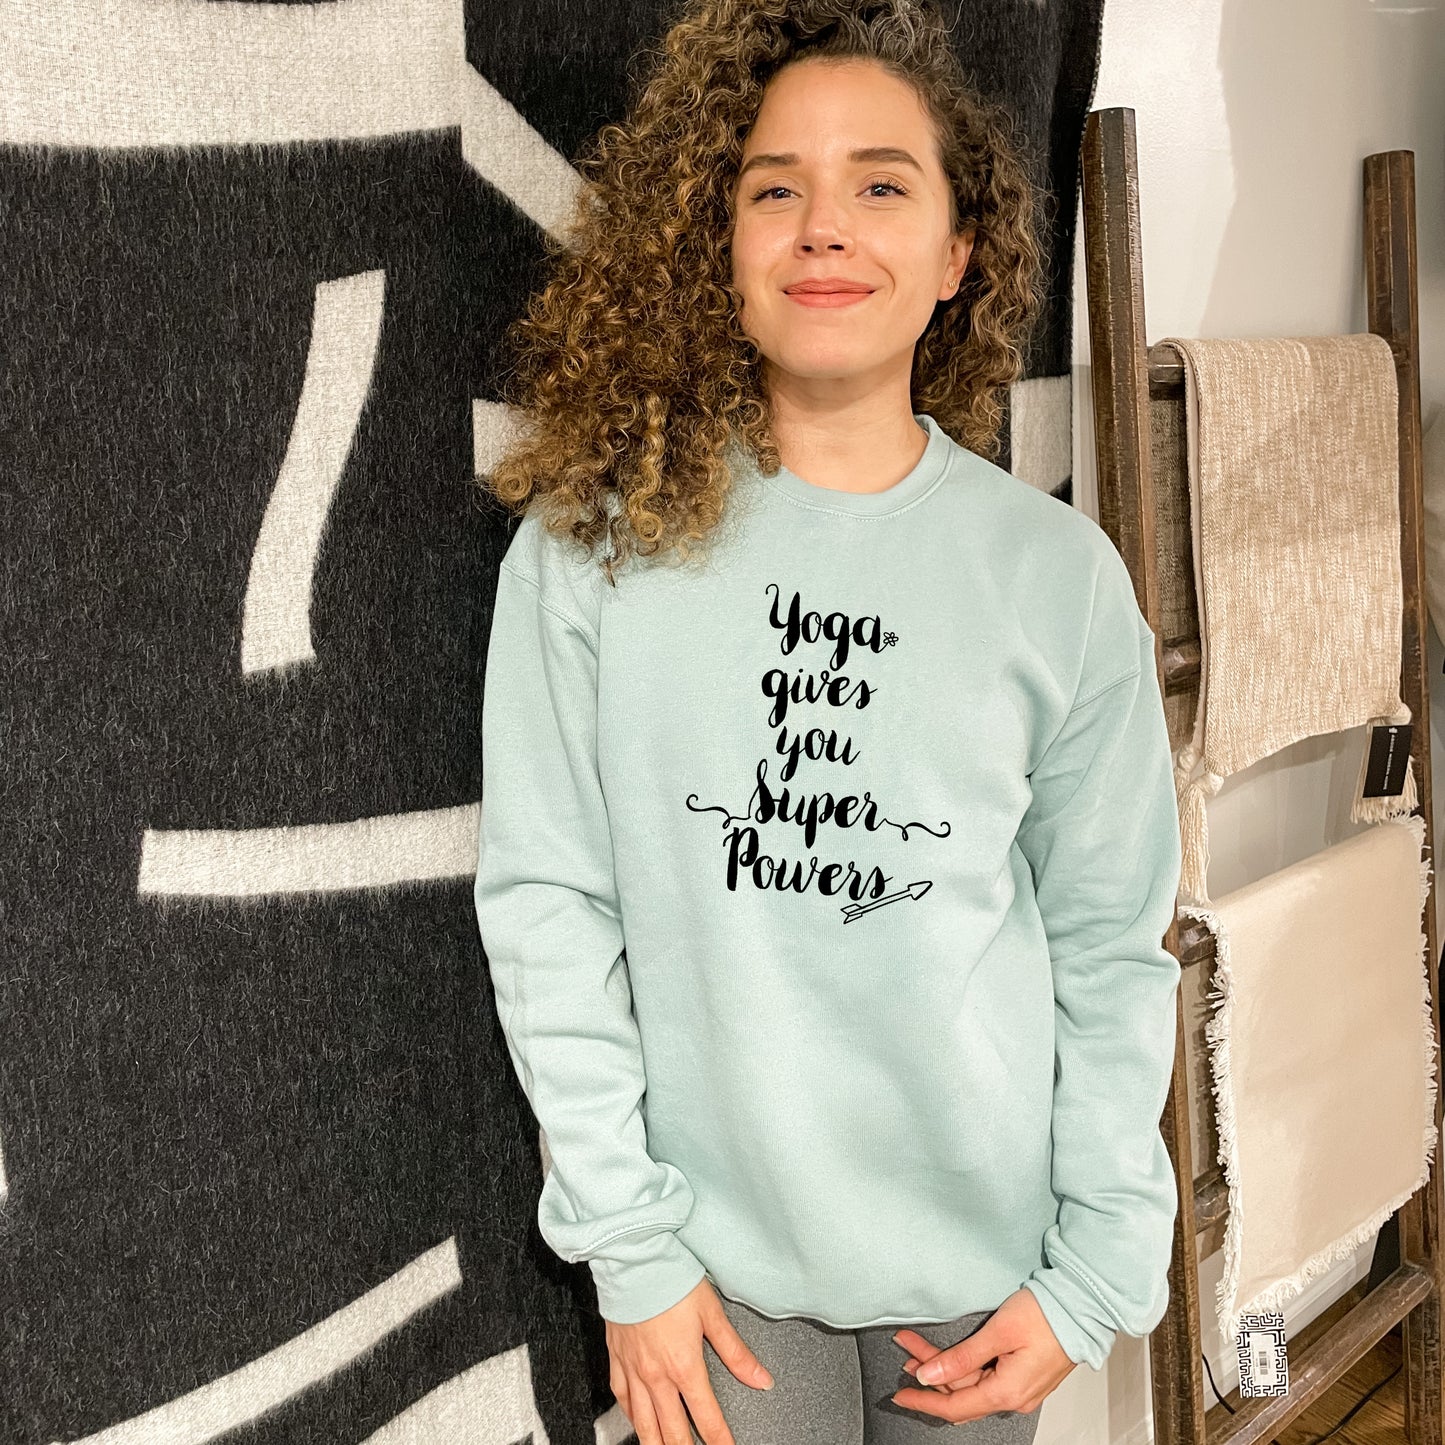 Yoga Gives You Superpowers - Unisex Sweatshirt - Heather Gray or Dusty Blue